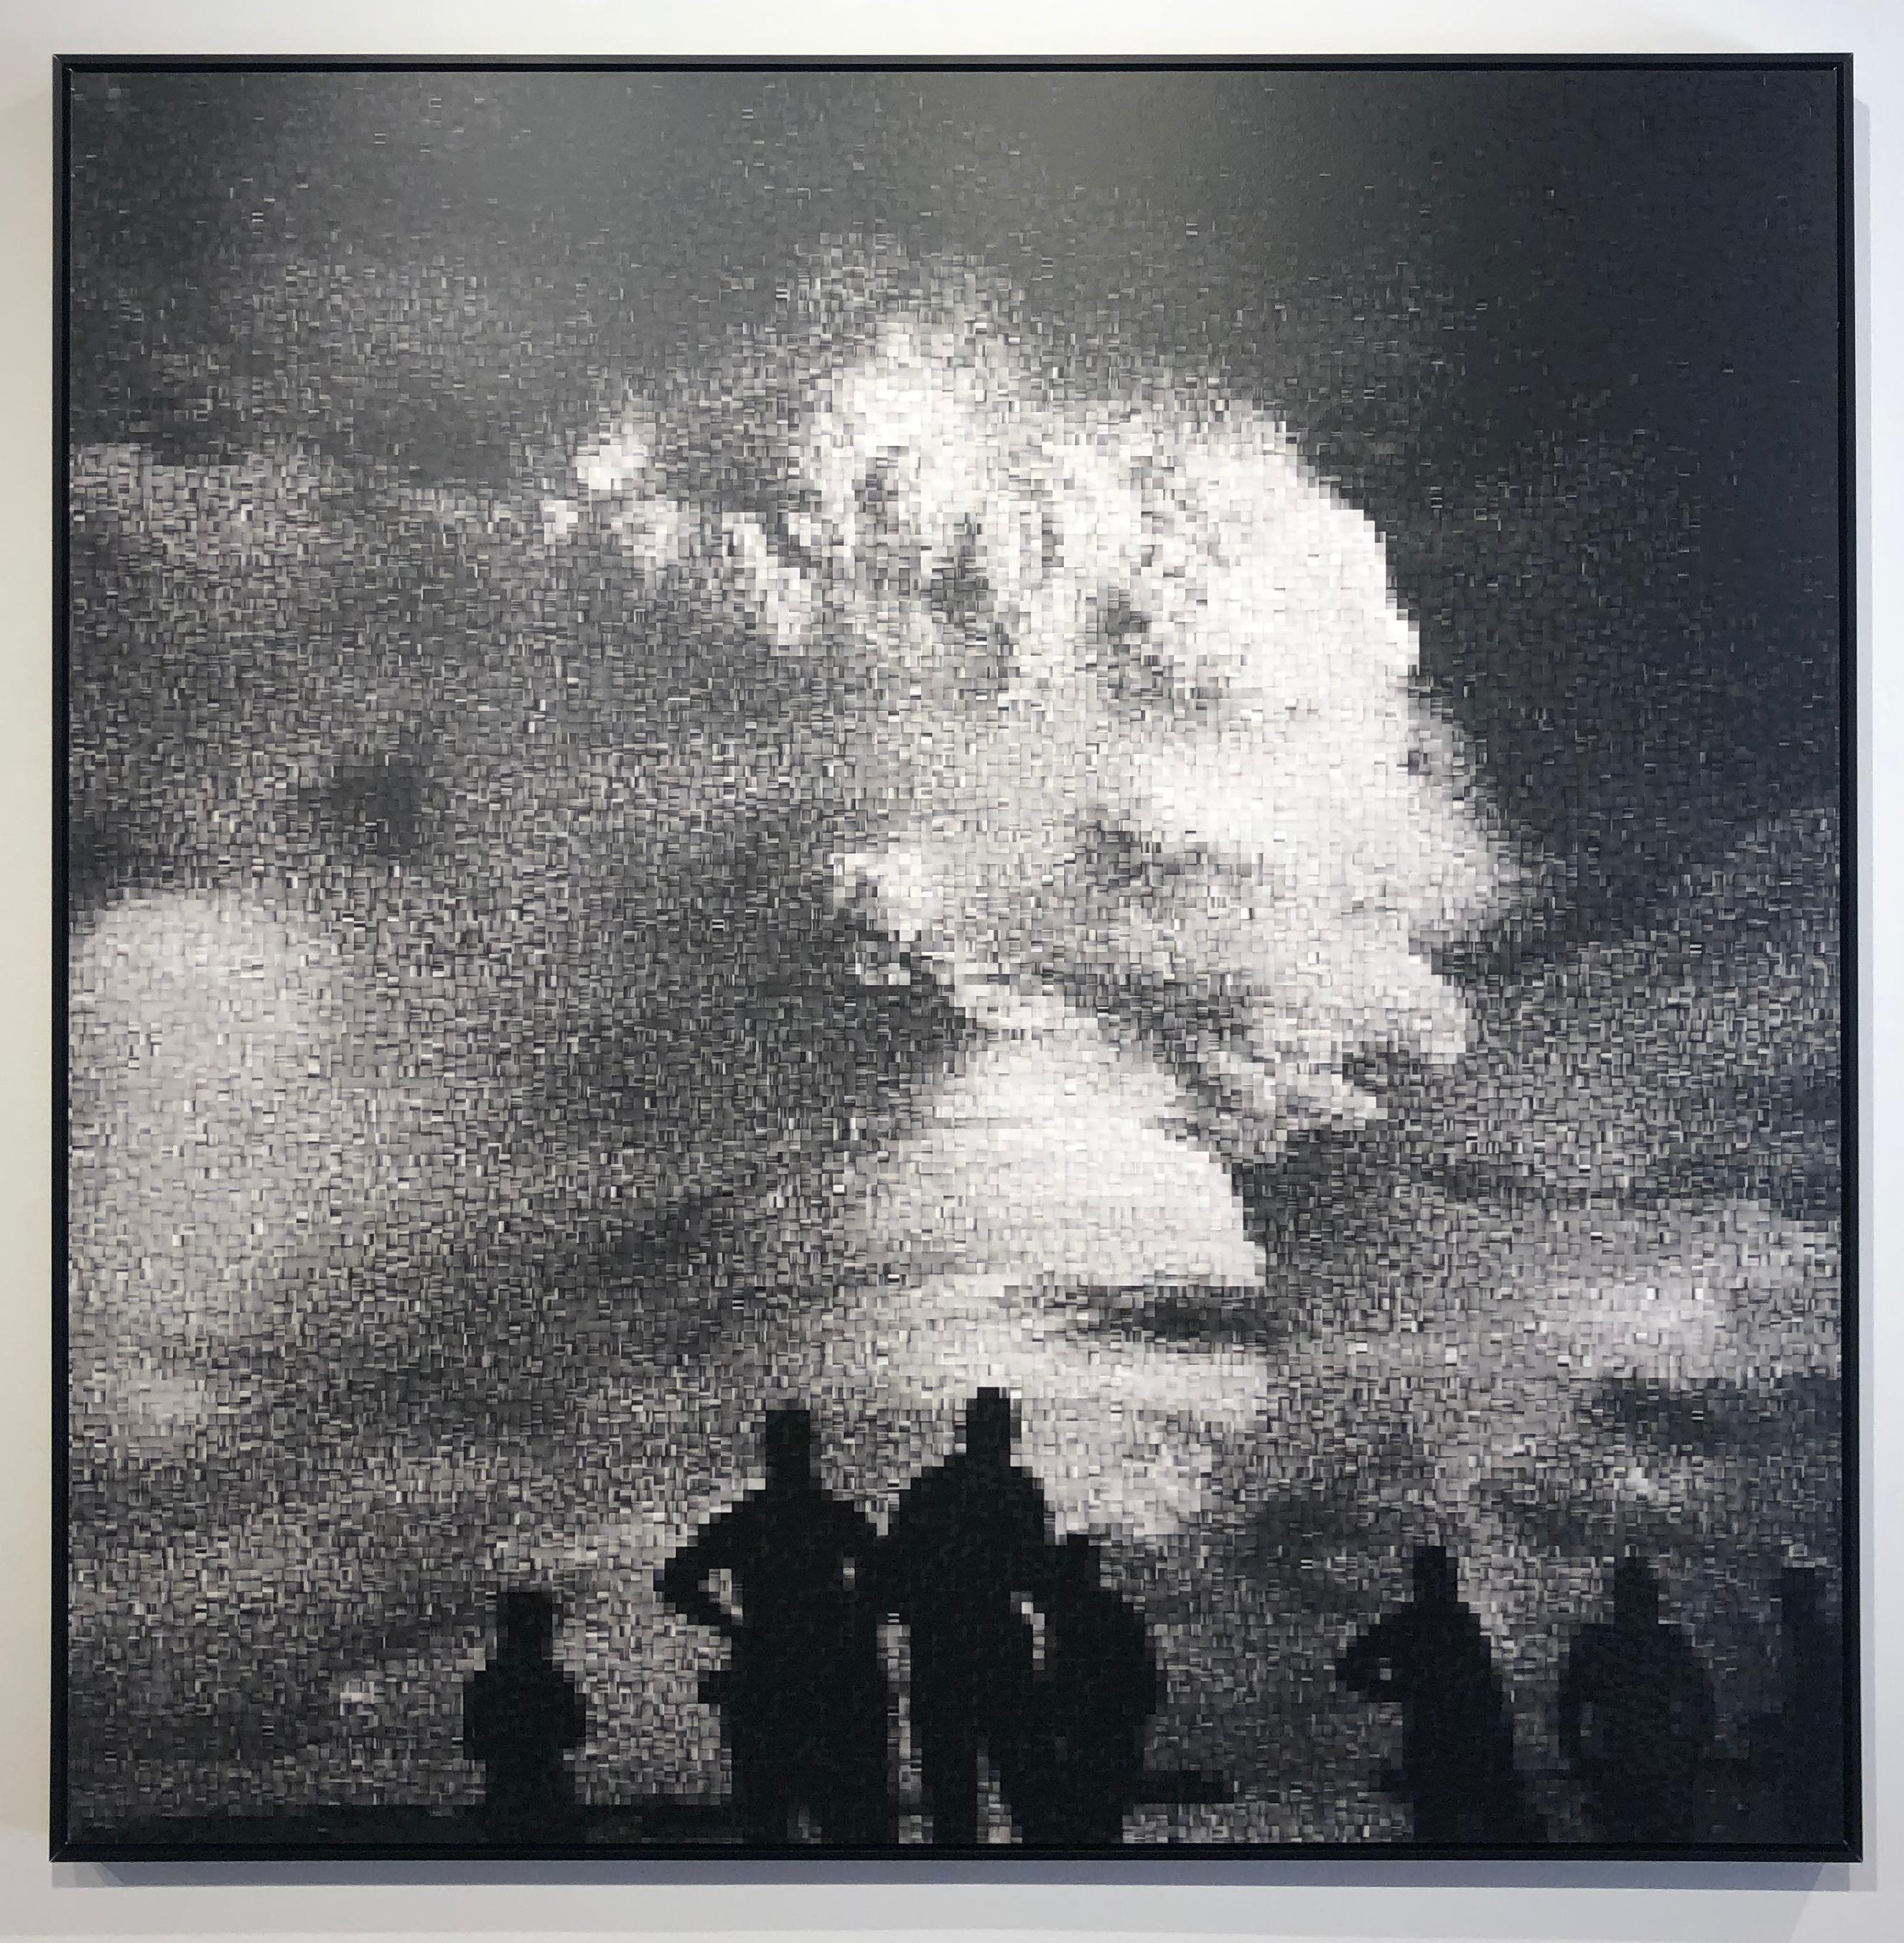 Operation Hardtack: Oak - Declassified Military Bomb Test Photo Abstraction - Print by Jan Pieter Fokkens